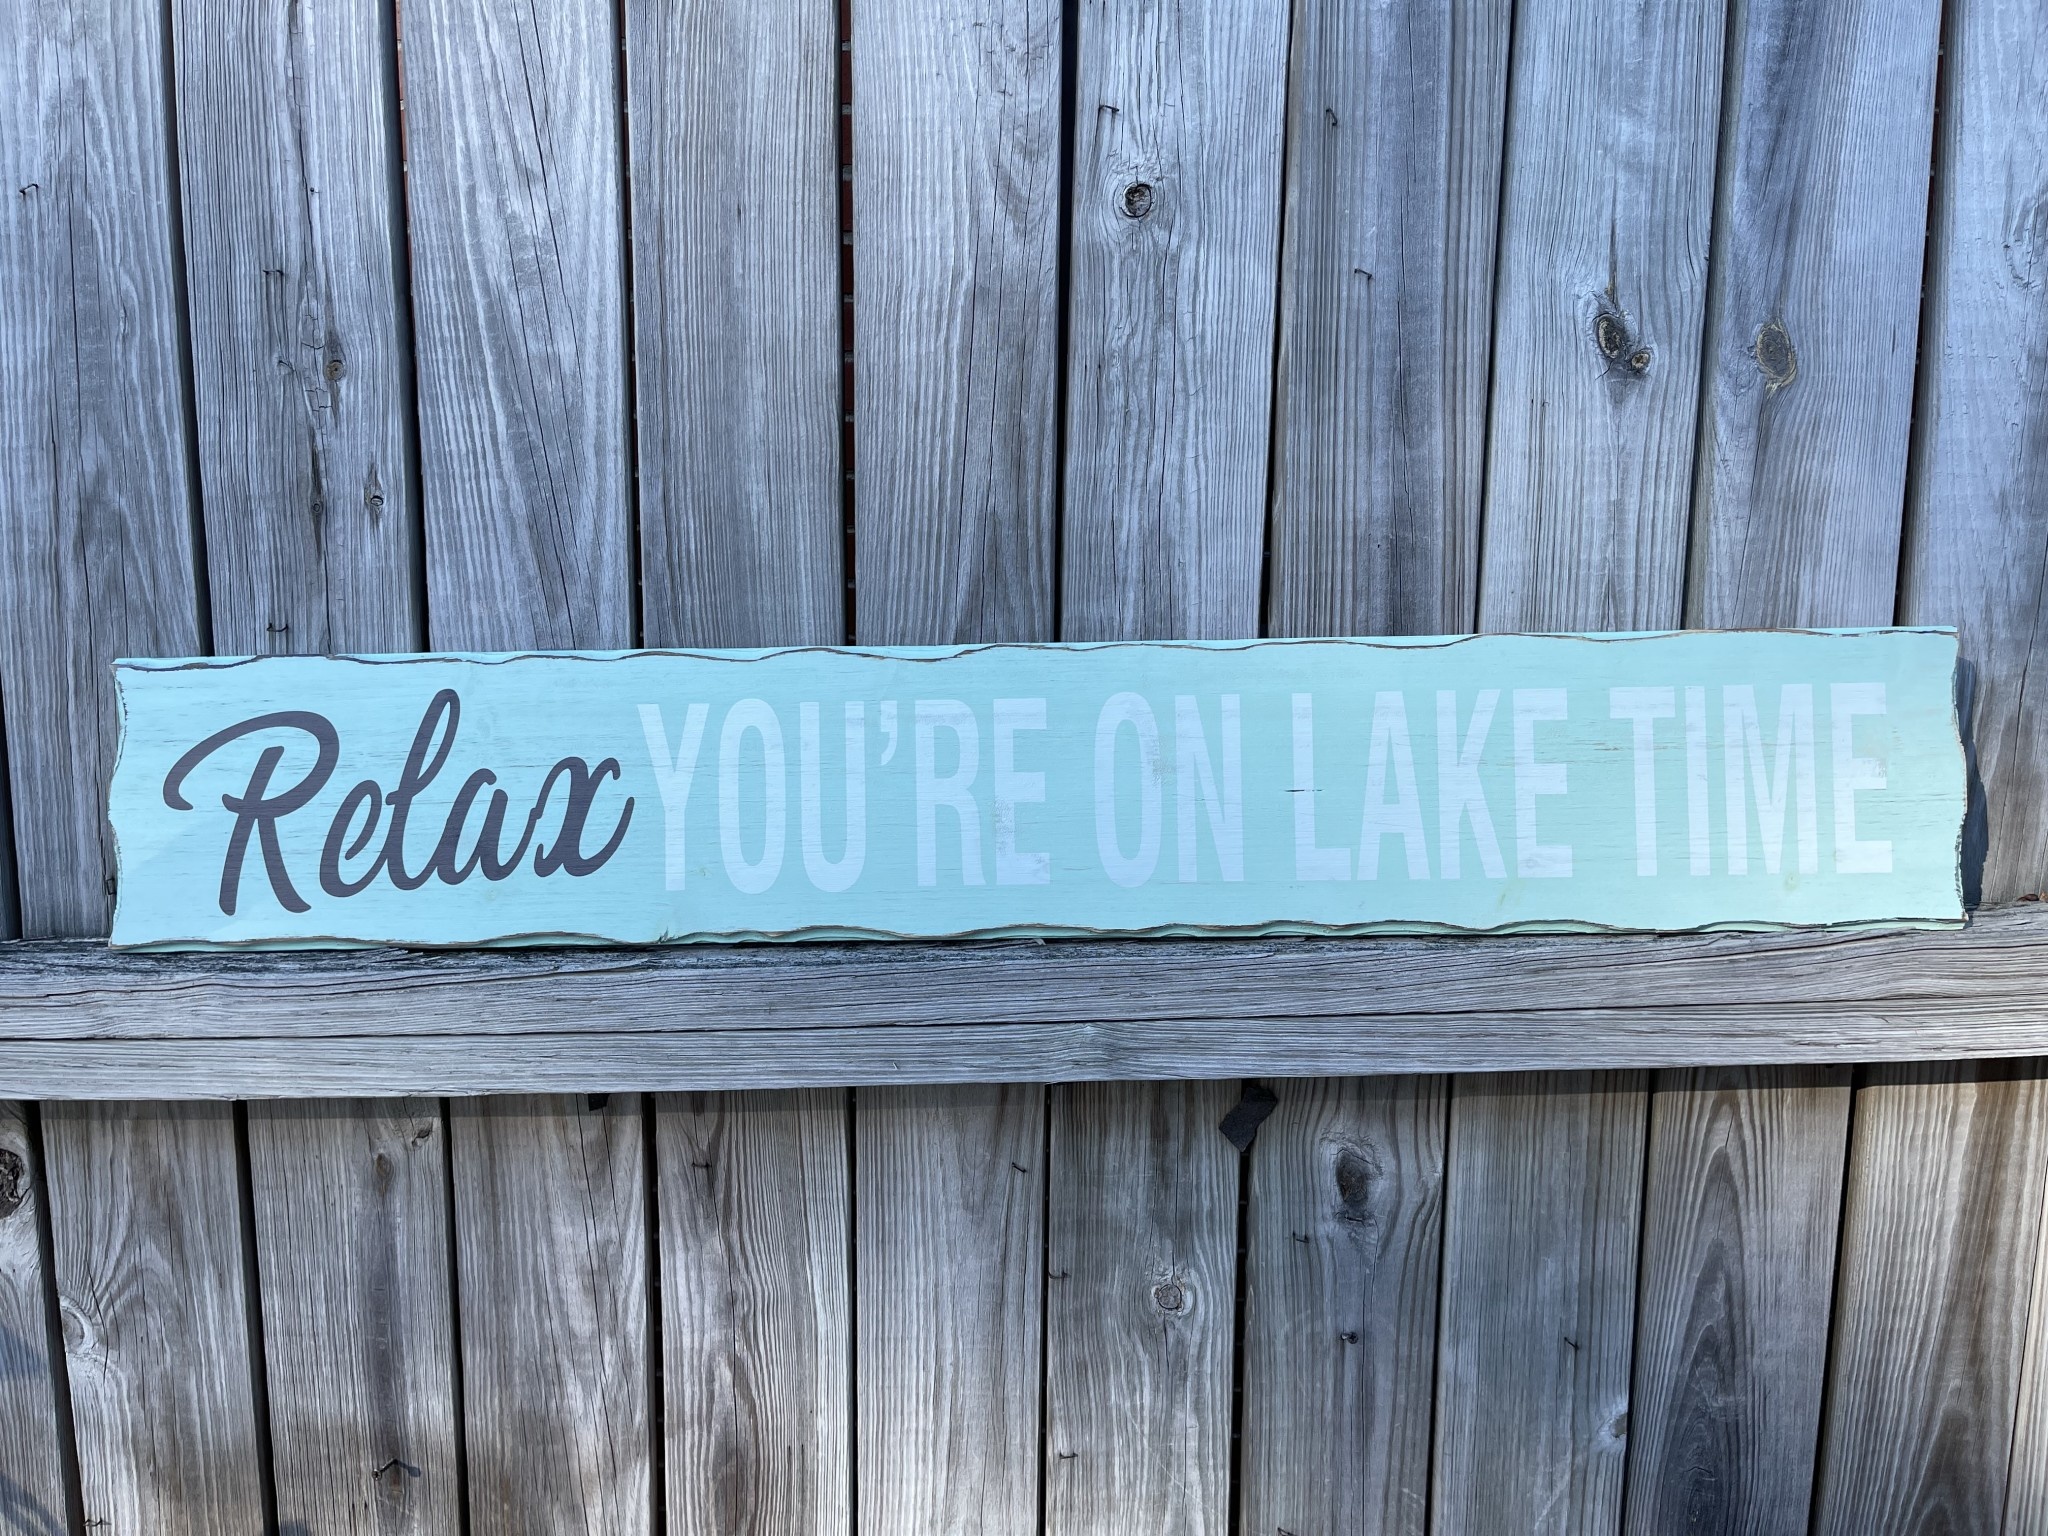 Wooden Relax You're on Lake Time Sign